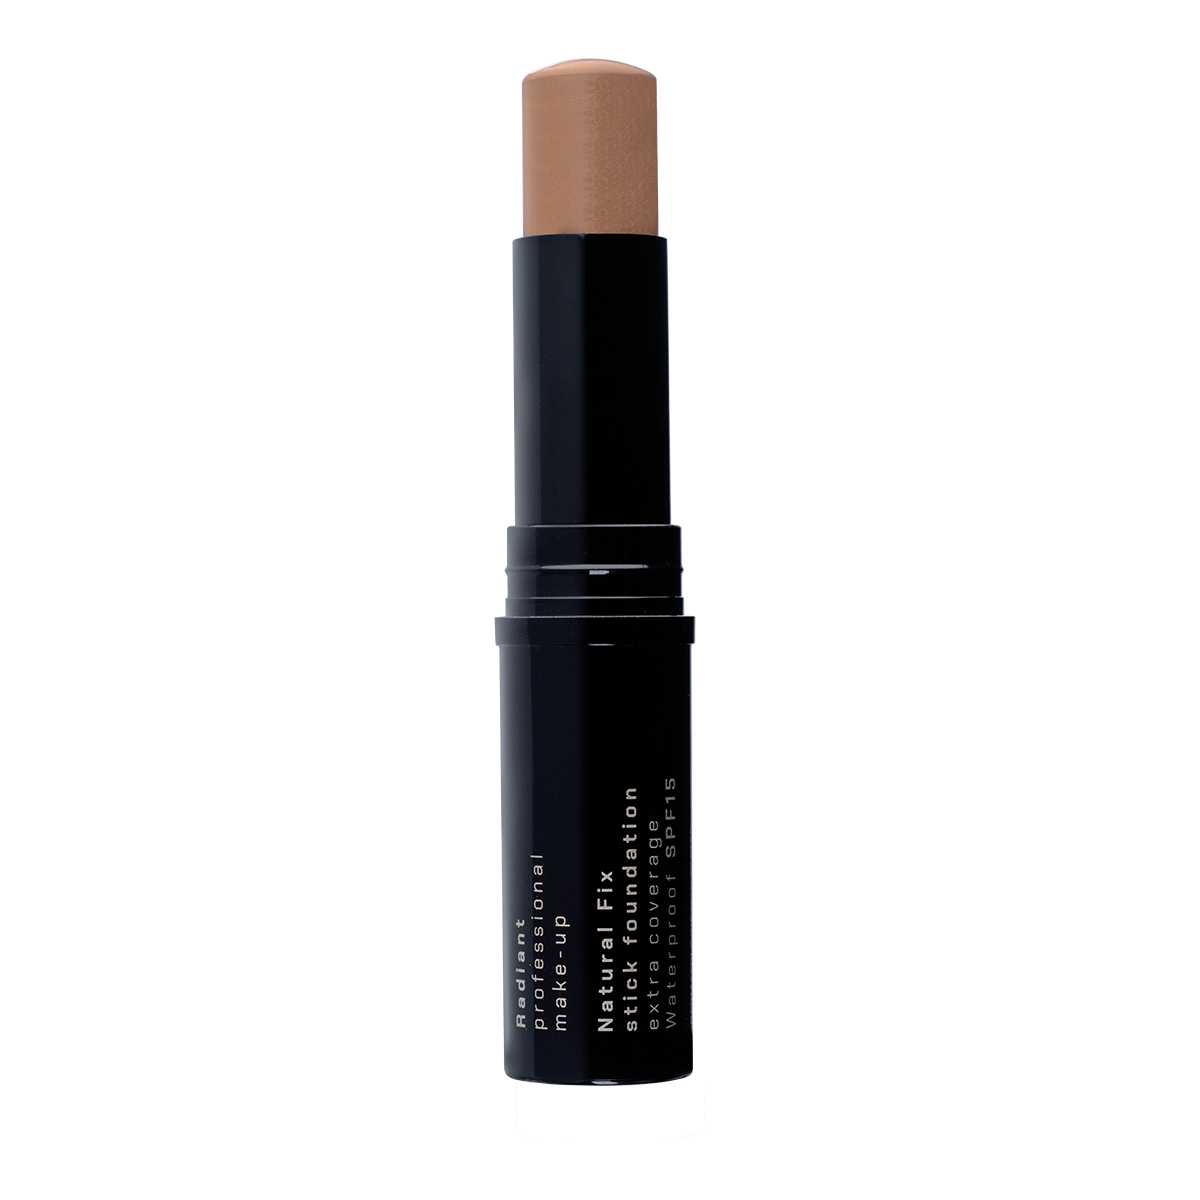 NATURAL FIX EXTRA COVERAGE STICK FOUNDATION WATERPROOF SPF 15